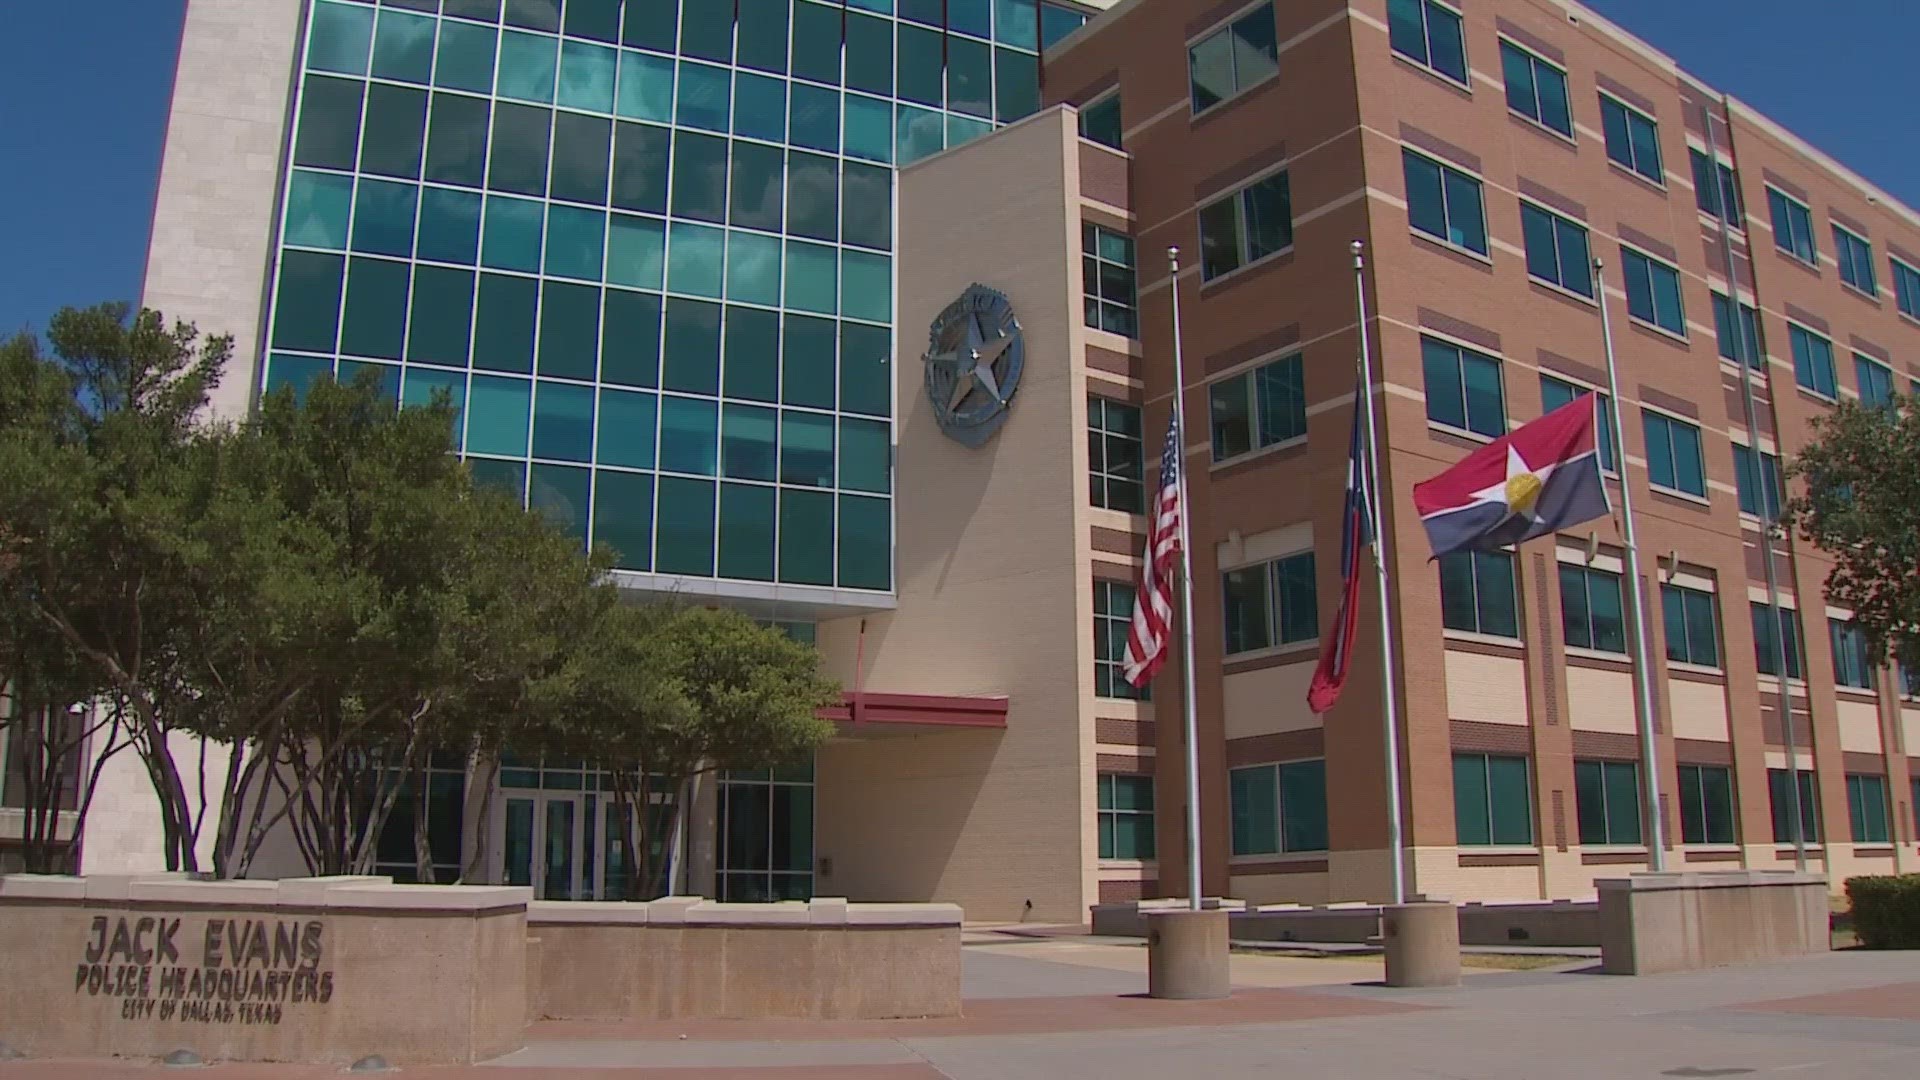 The district attorney said he was notified that Dallas police found an issue regarding evidence between 2016 and 2021.